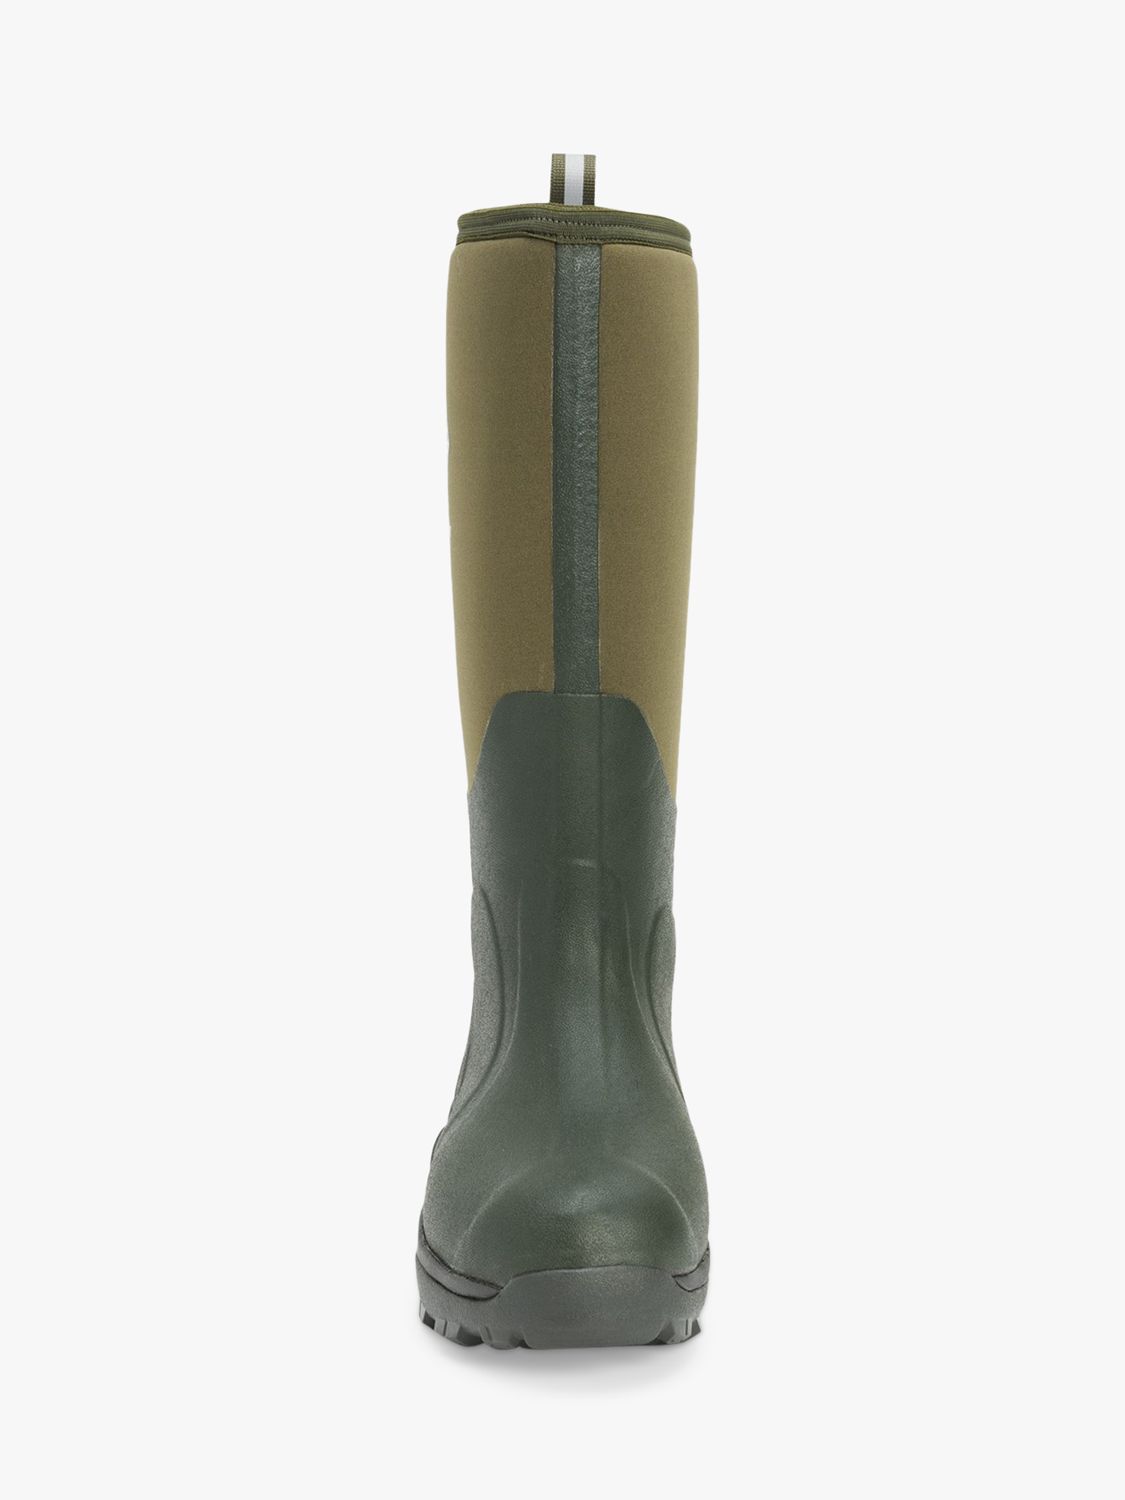 Muck Arctic Sport Pull On Wellington Boots, Moss at John Lewis & Partners